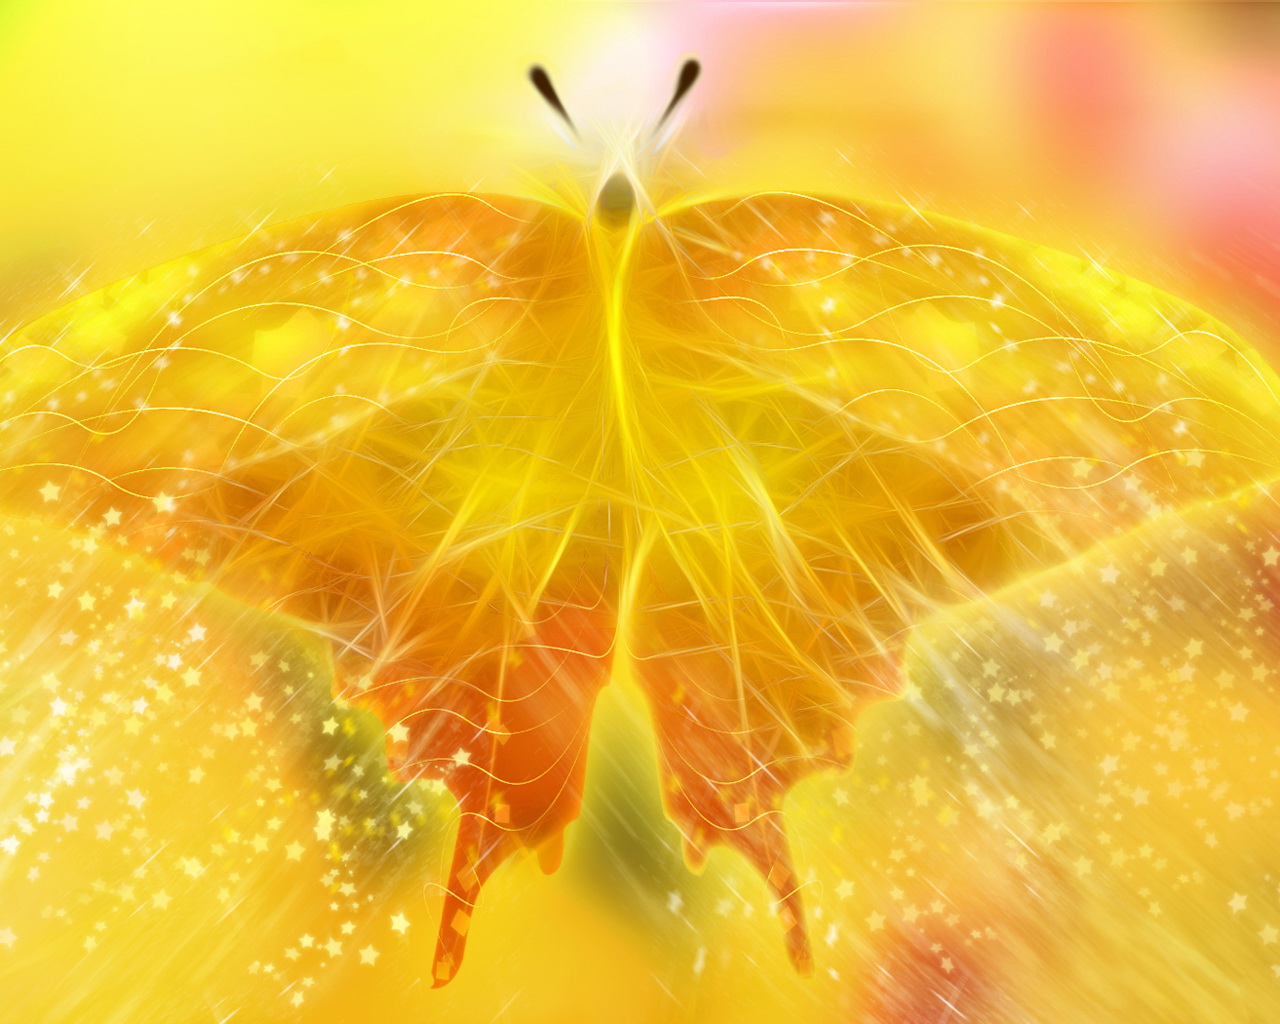 Previous, 3D-graphics - Yellow butterfly wallpaper